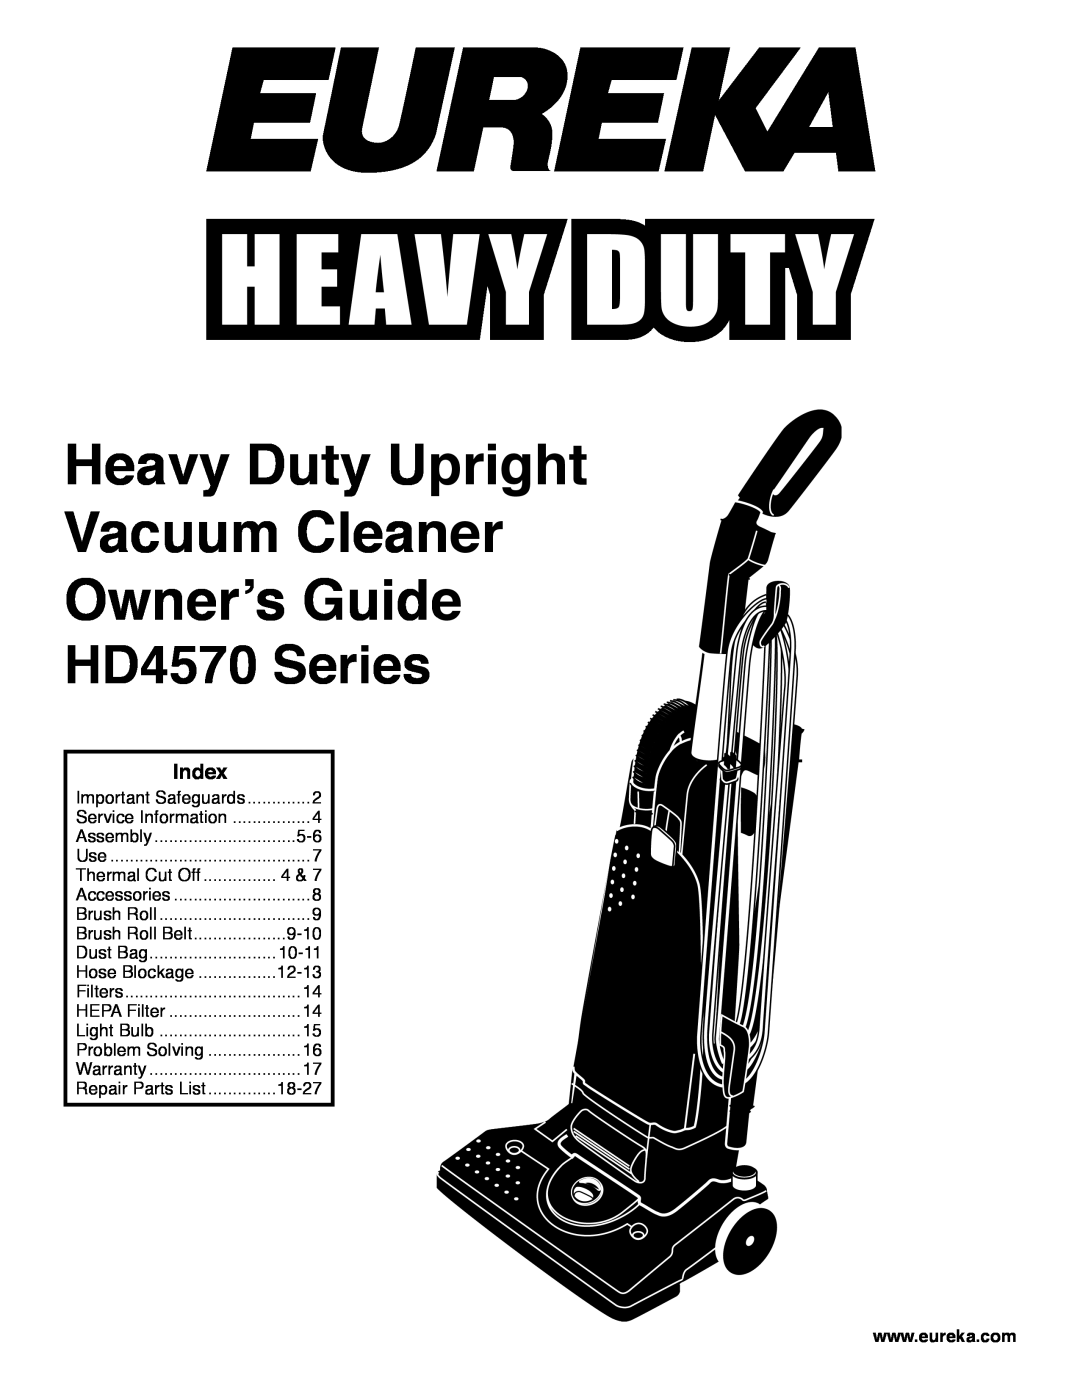 Eureka warranty HD4570 Series, Index, Heavy Duty Upright Vacuum Cleaner Ownerʼs Guide, Dust Bag, Thermal Cut Off 